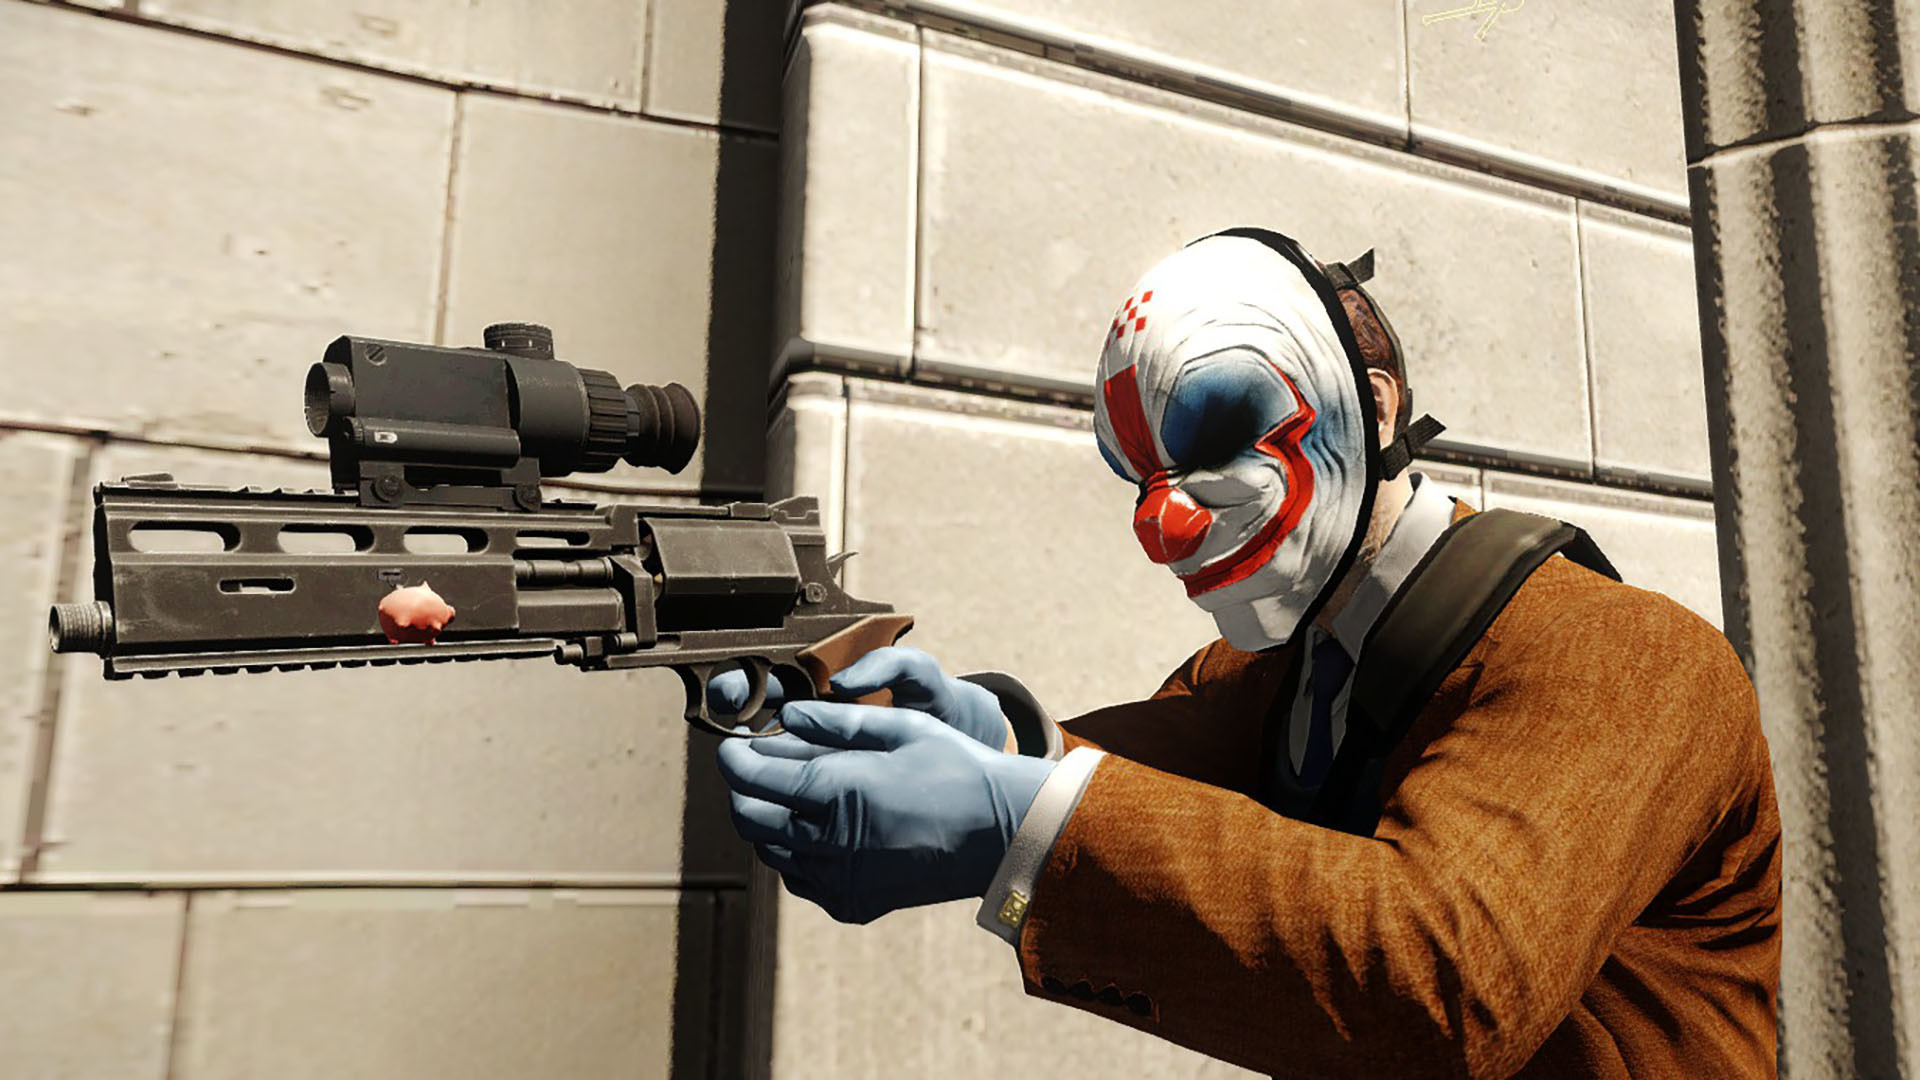 Completely overkill pack для payday 2 фото 26